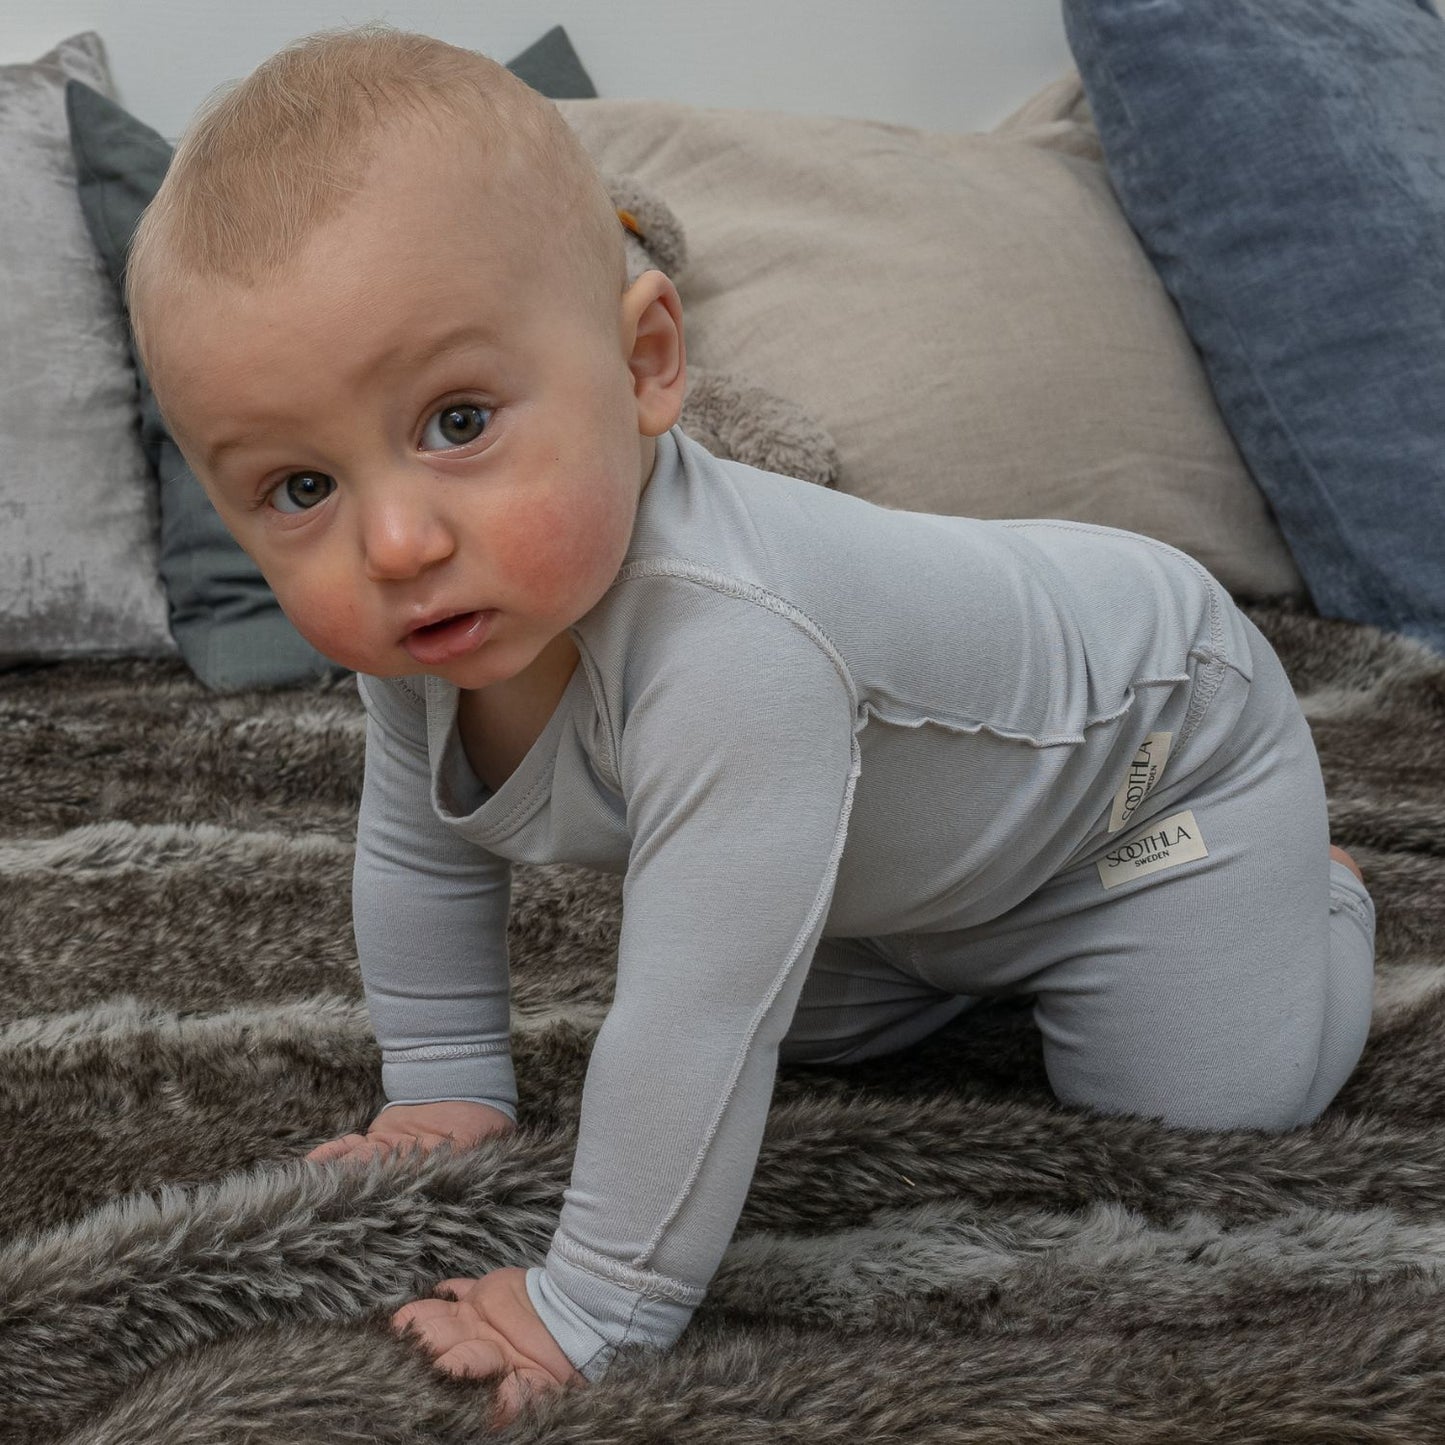 Crawling Baby Wearing Allergy-friendly Pyjama Set In Micro Chip From SOOTHLA